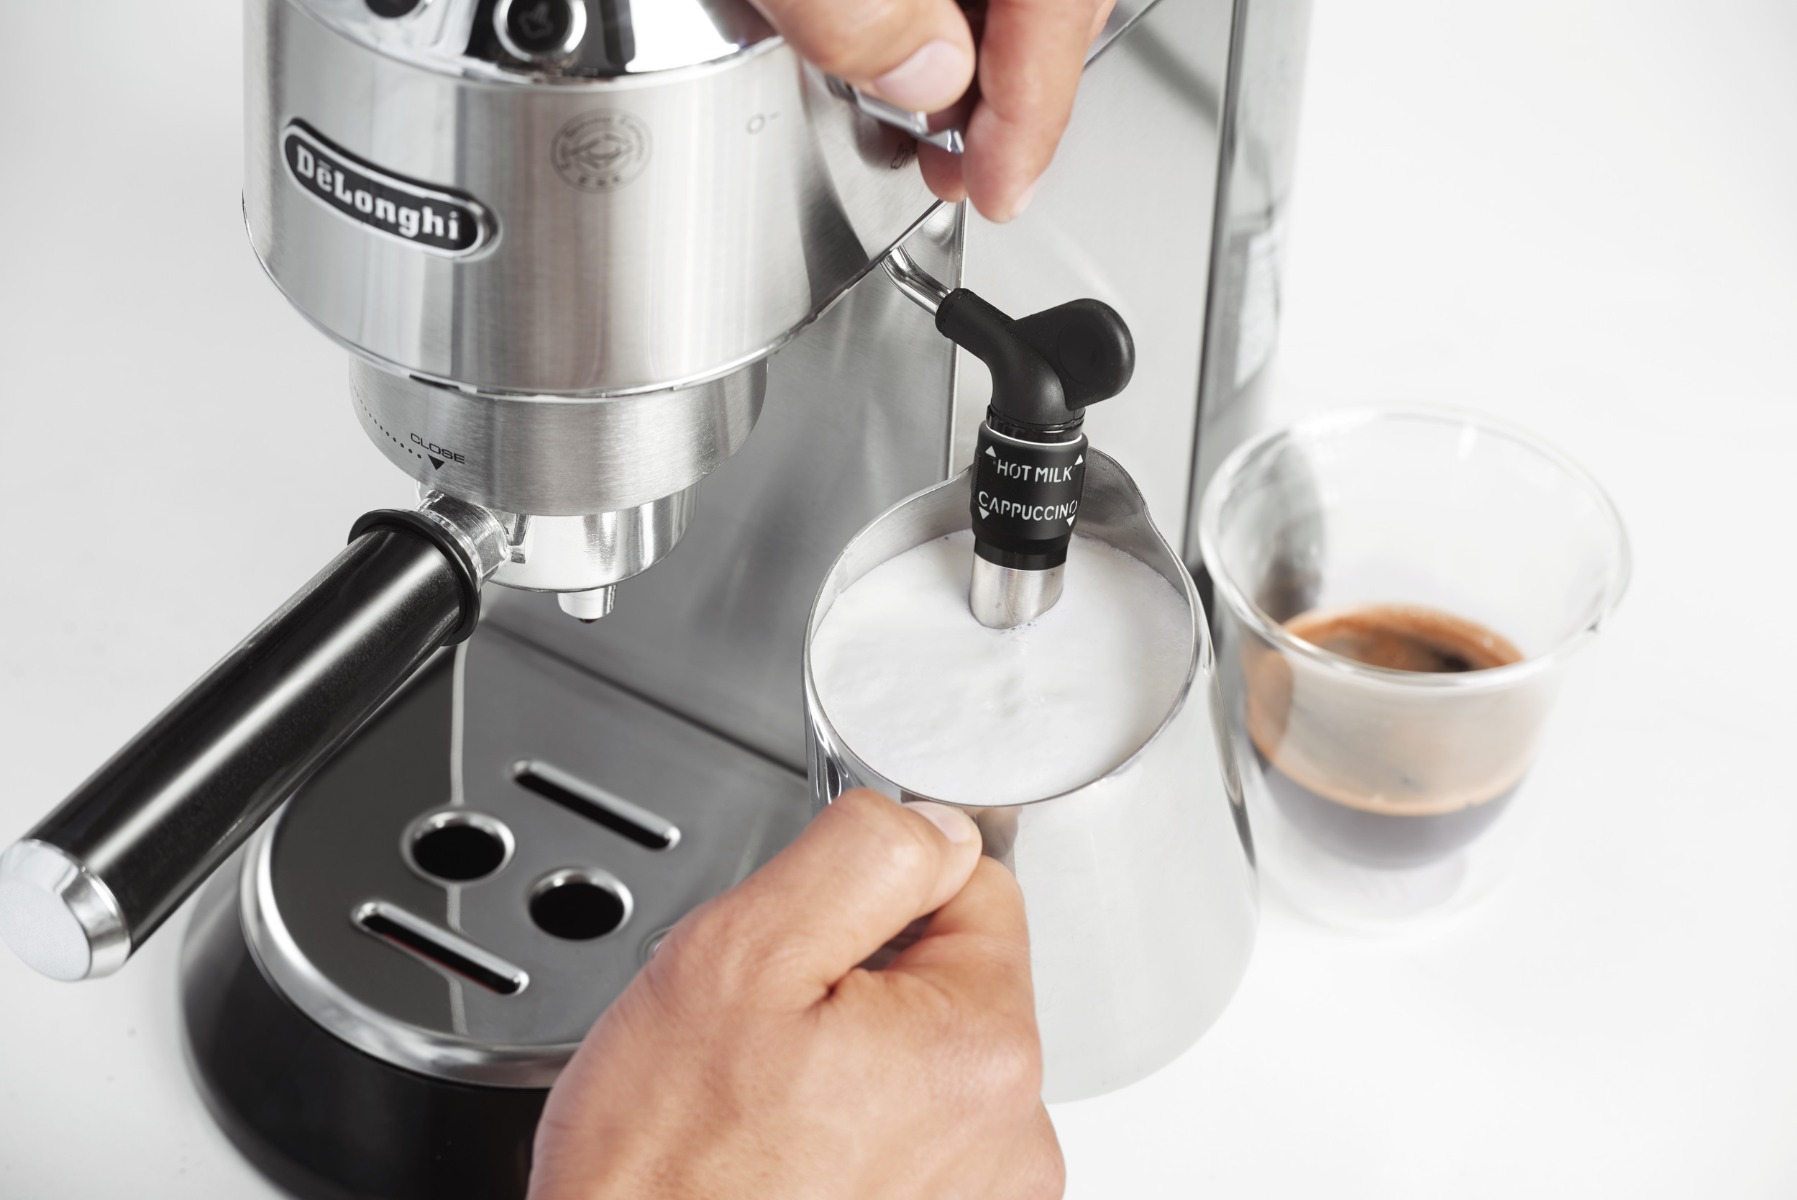 How To Froth Milk With The Delonghi Espresso Machine